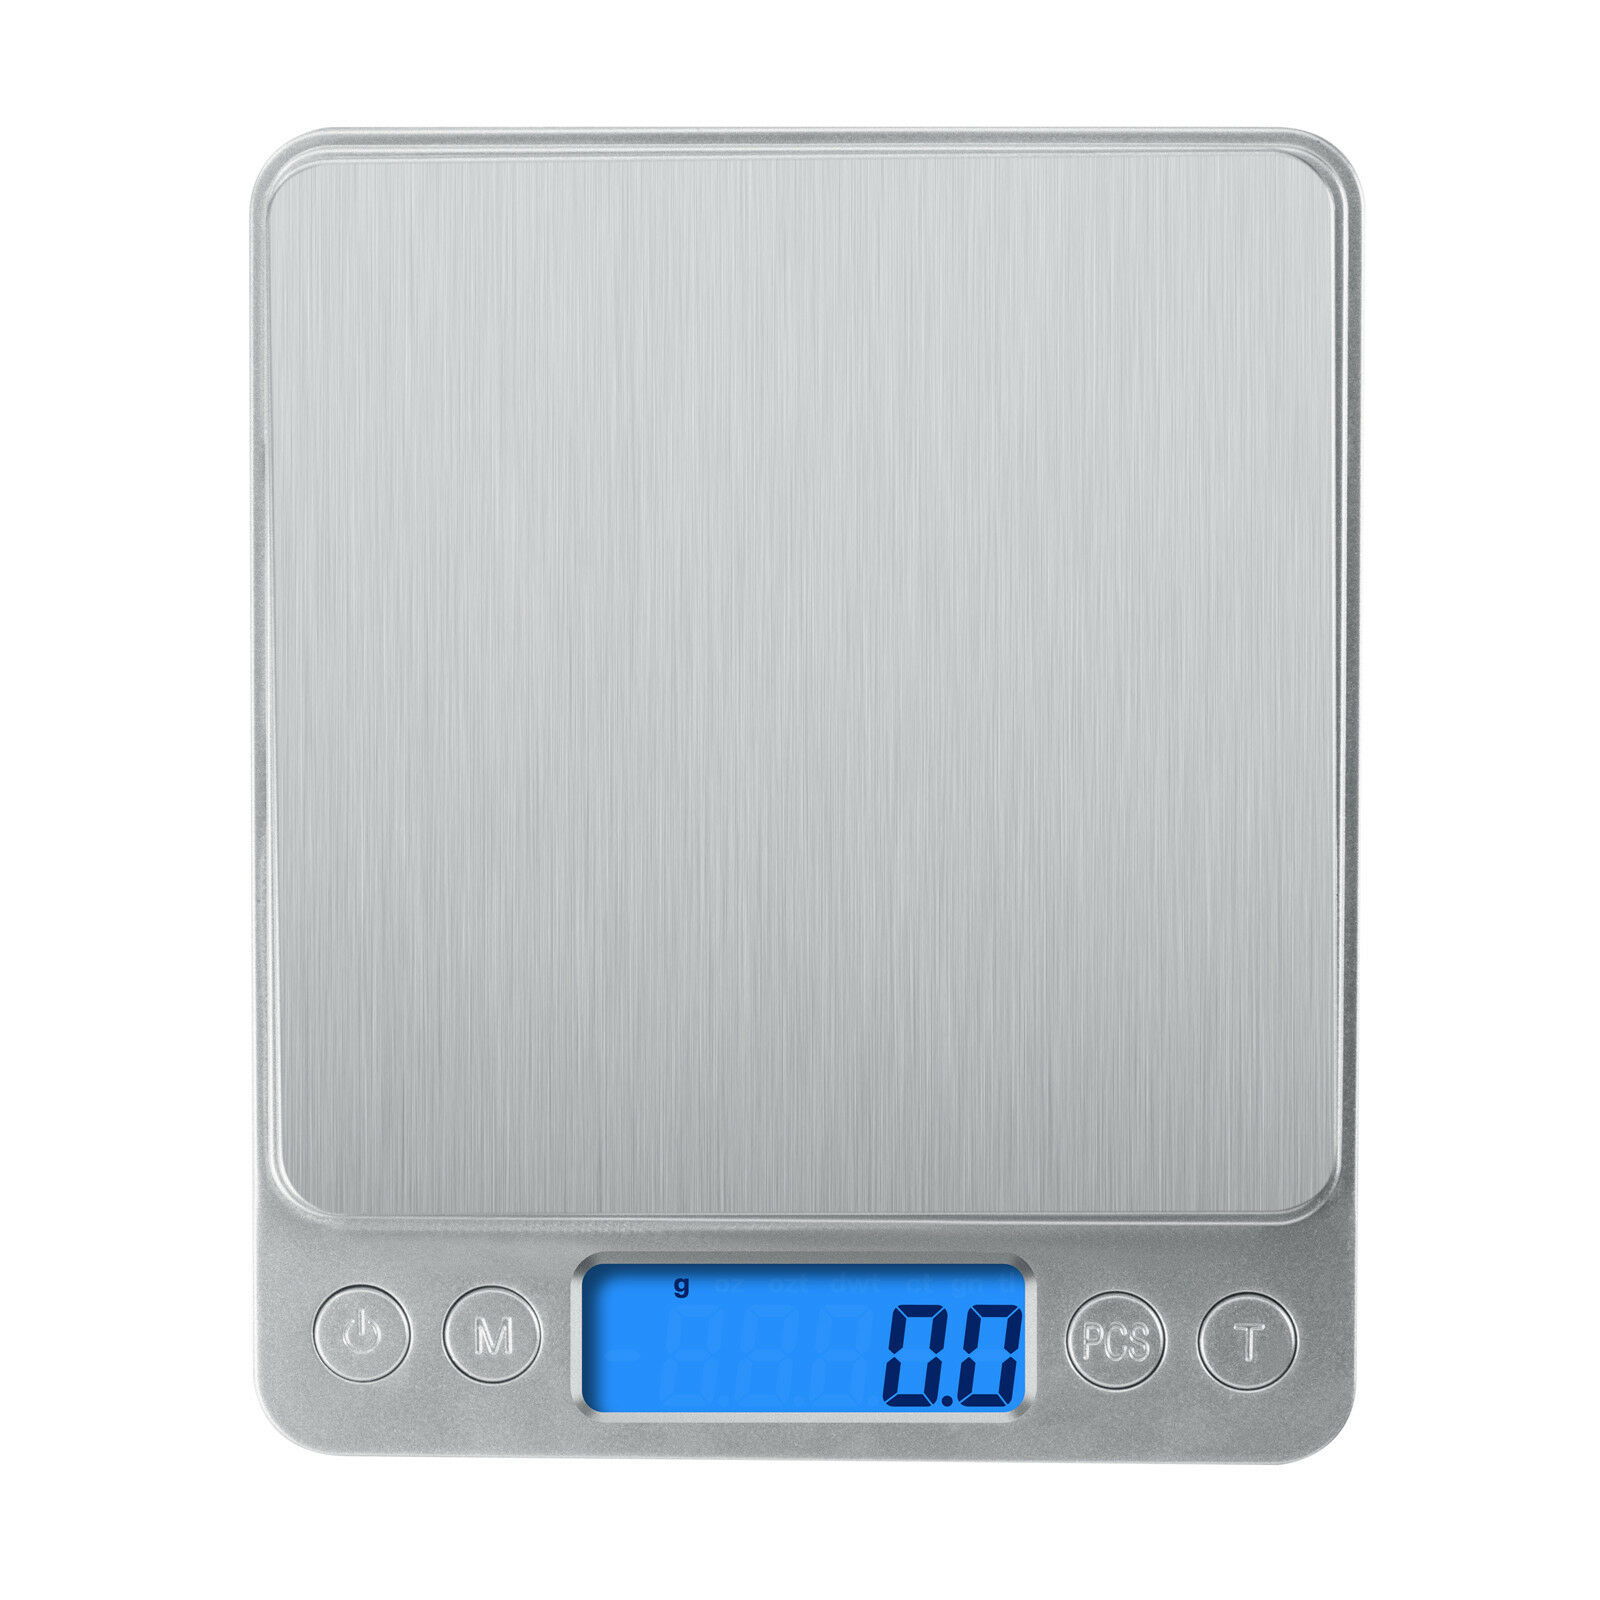 Digital Scale 3000g X 0.1g Jewelry Gold Silver Coin Gram Pocket Size Herb Grain